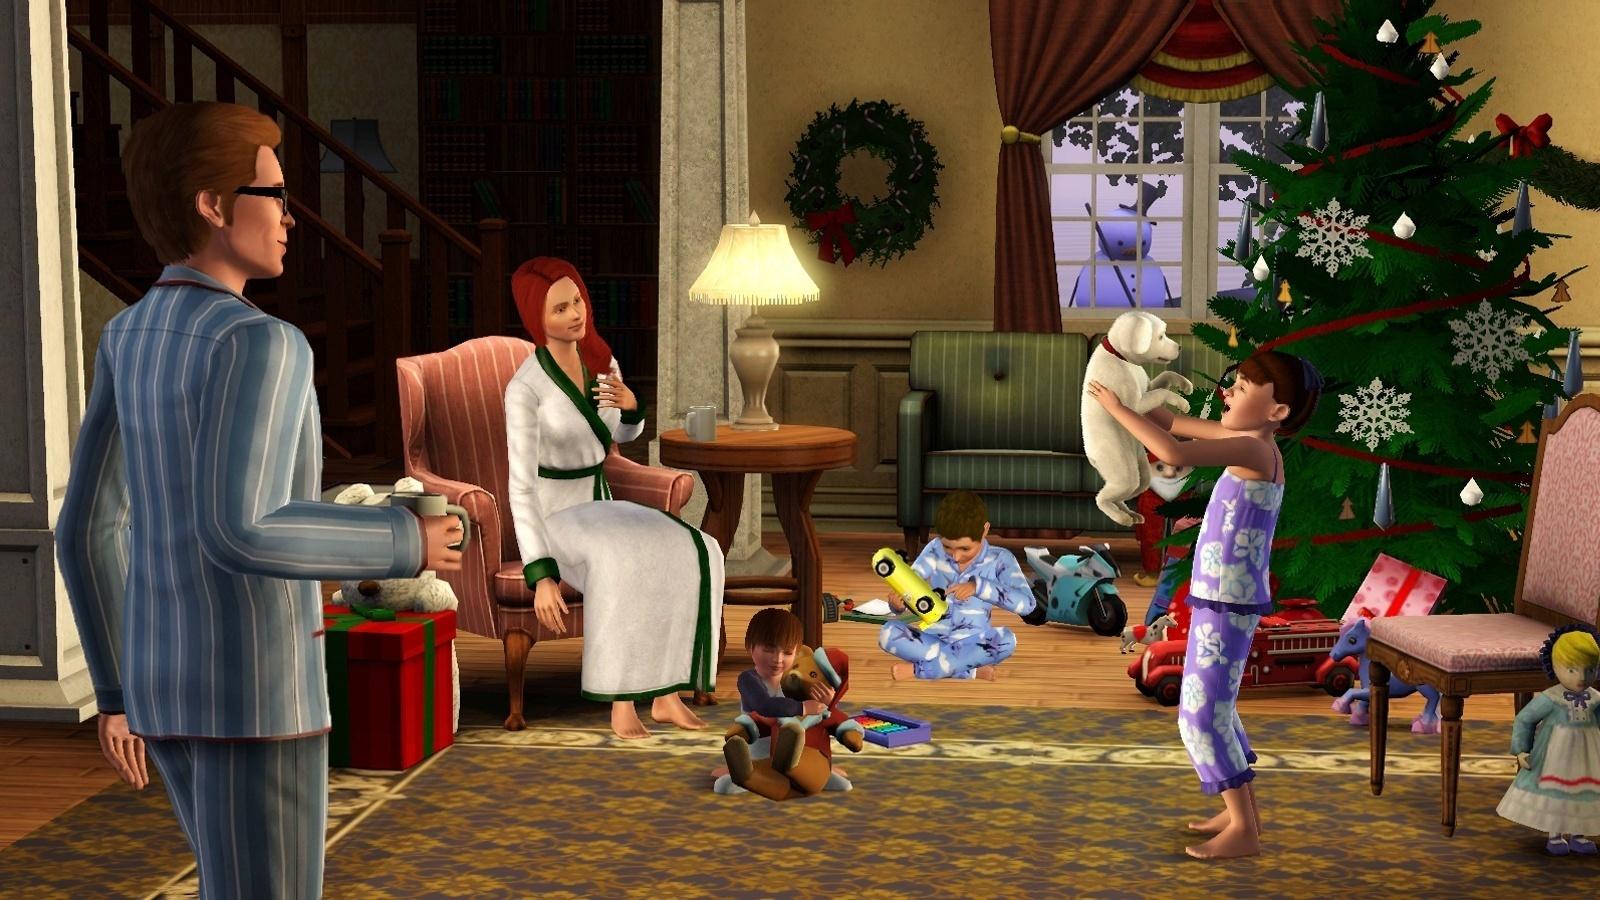 Игры симс лет. The SIMS 3. The SIMS 3 питомцы. SIMS 3 игра. Игра симс 3 питомцы.